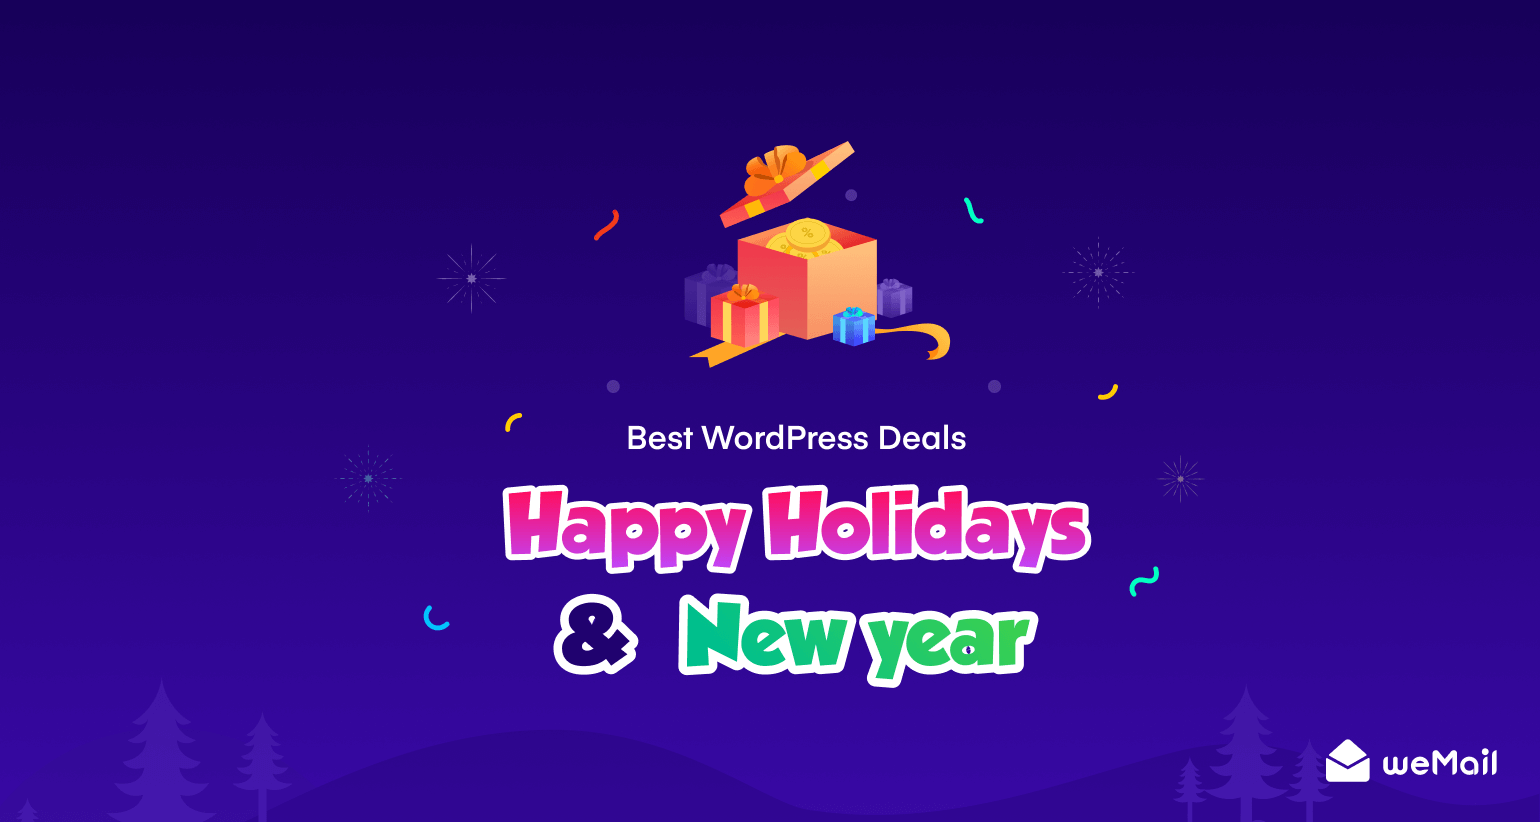 Best deals from WordPress Community on Christmas and New Year